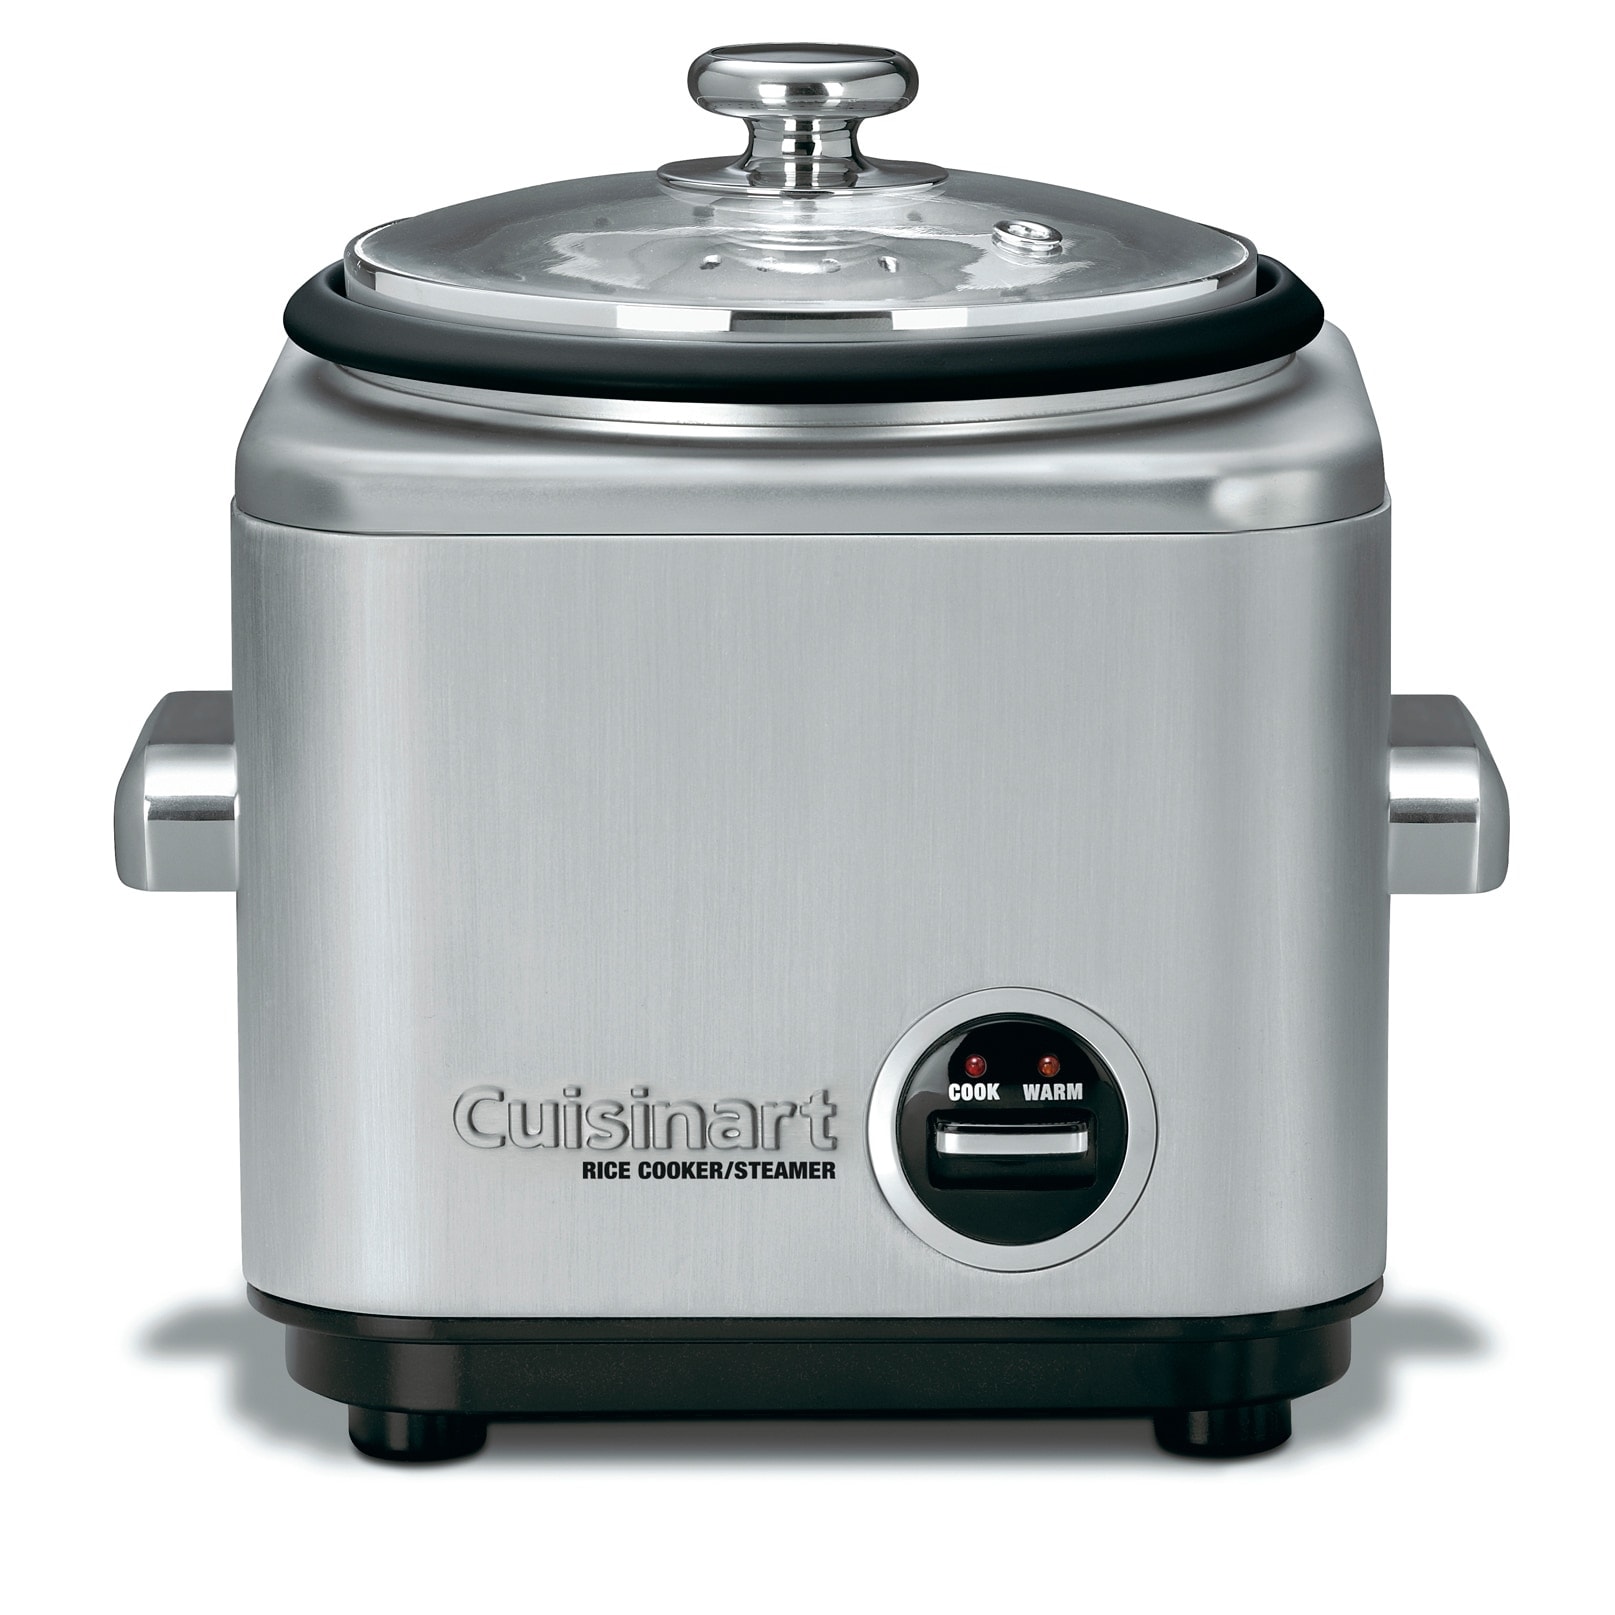 Cuisinart 4-Cup Rice Cooker at